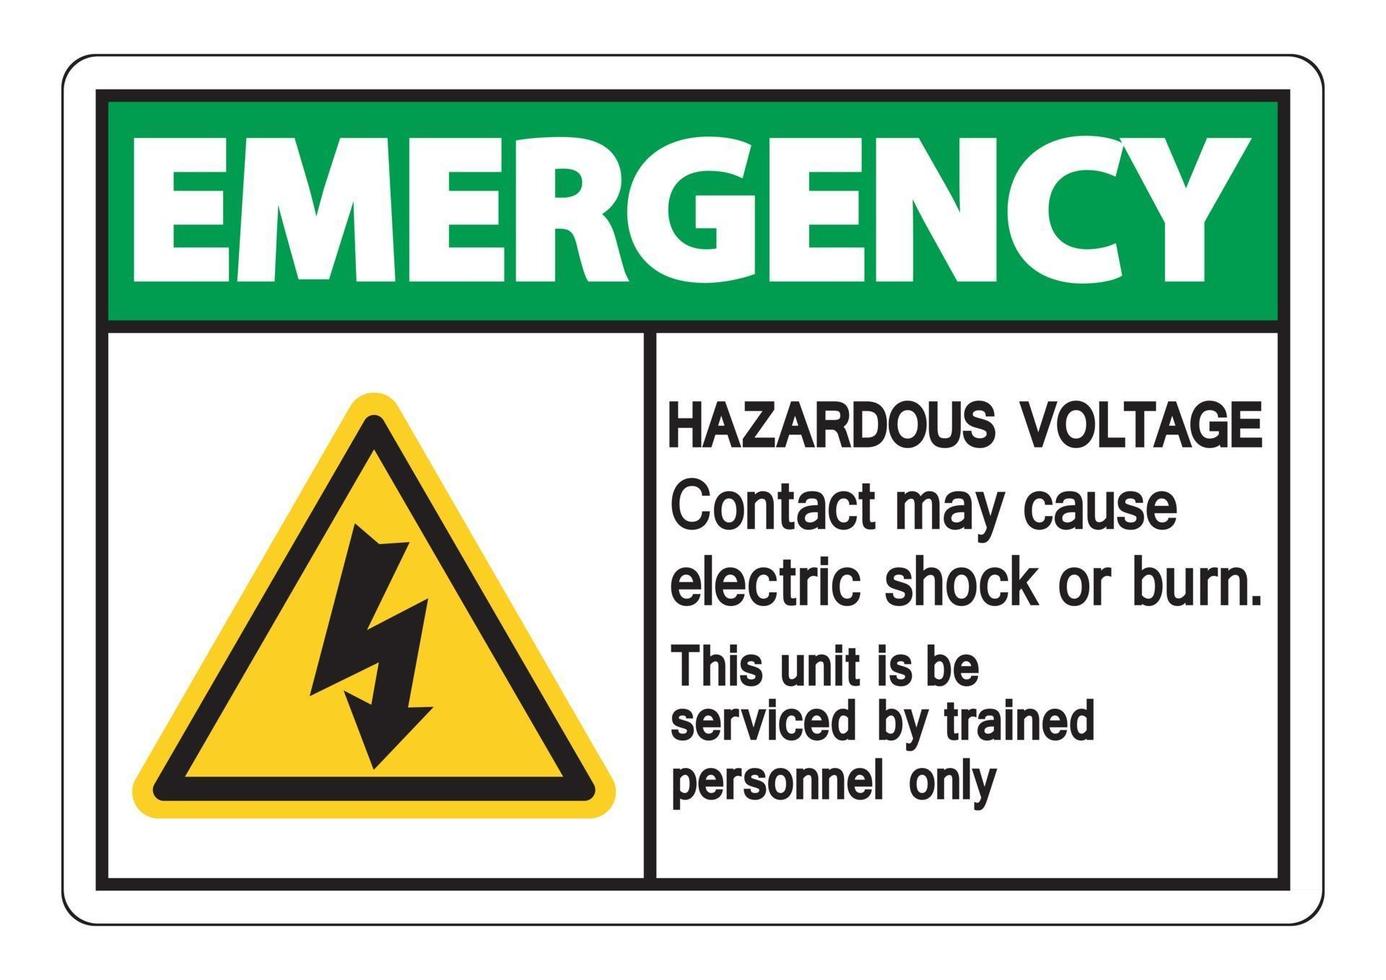 Emergency Hazardous Voltage Contact May Cause Electric Shock Or Burn Sign On White Background vector